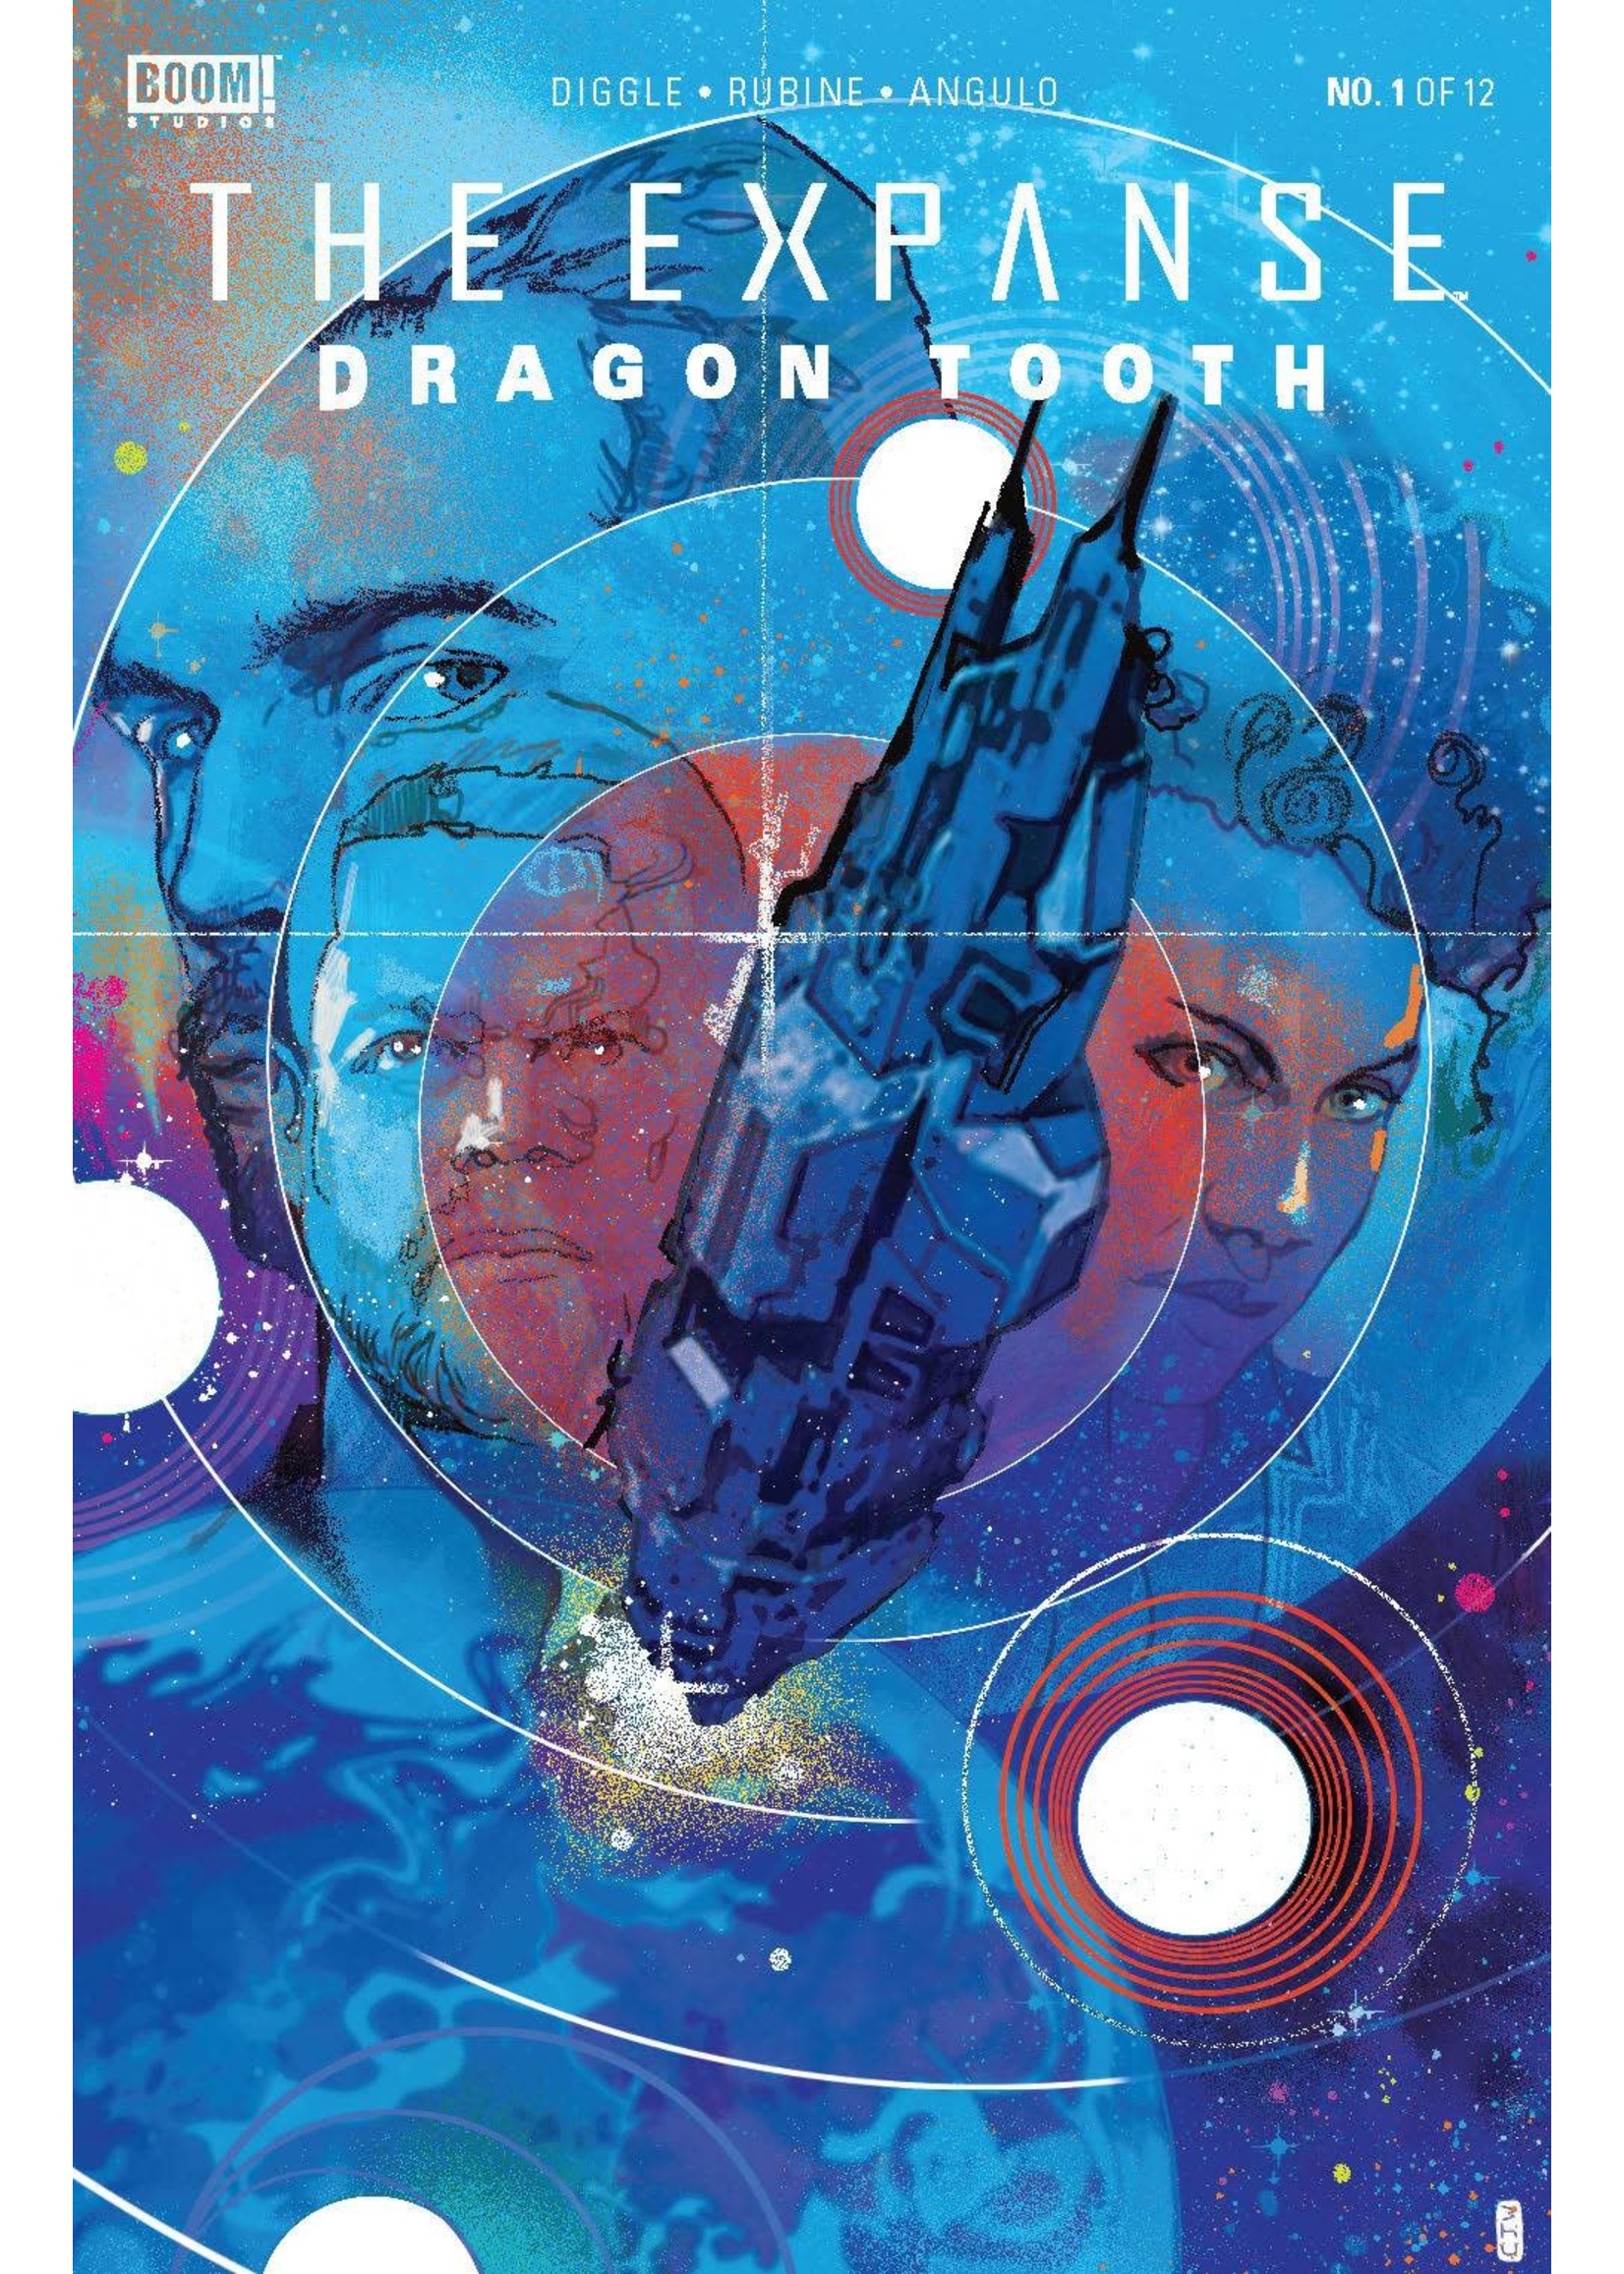 BOOM! STUDIOS EXPANSE THE DRAGON TOOTH #1 (OF 12) CVR A WARD